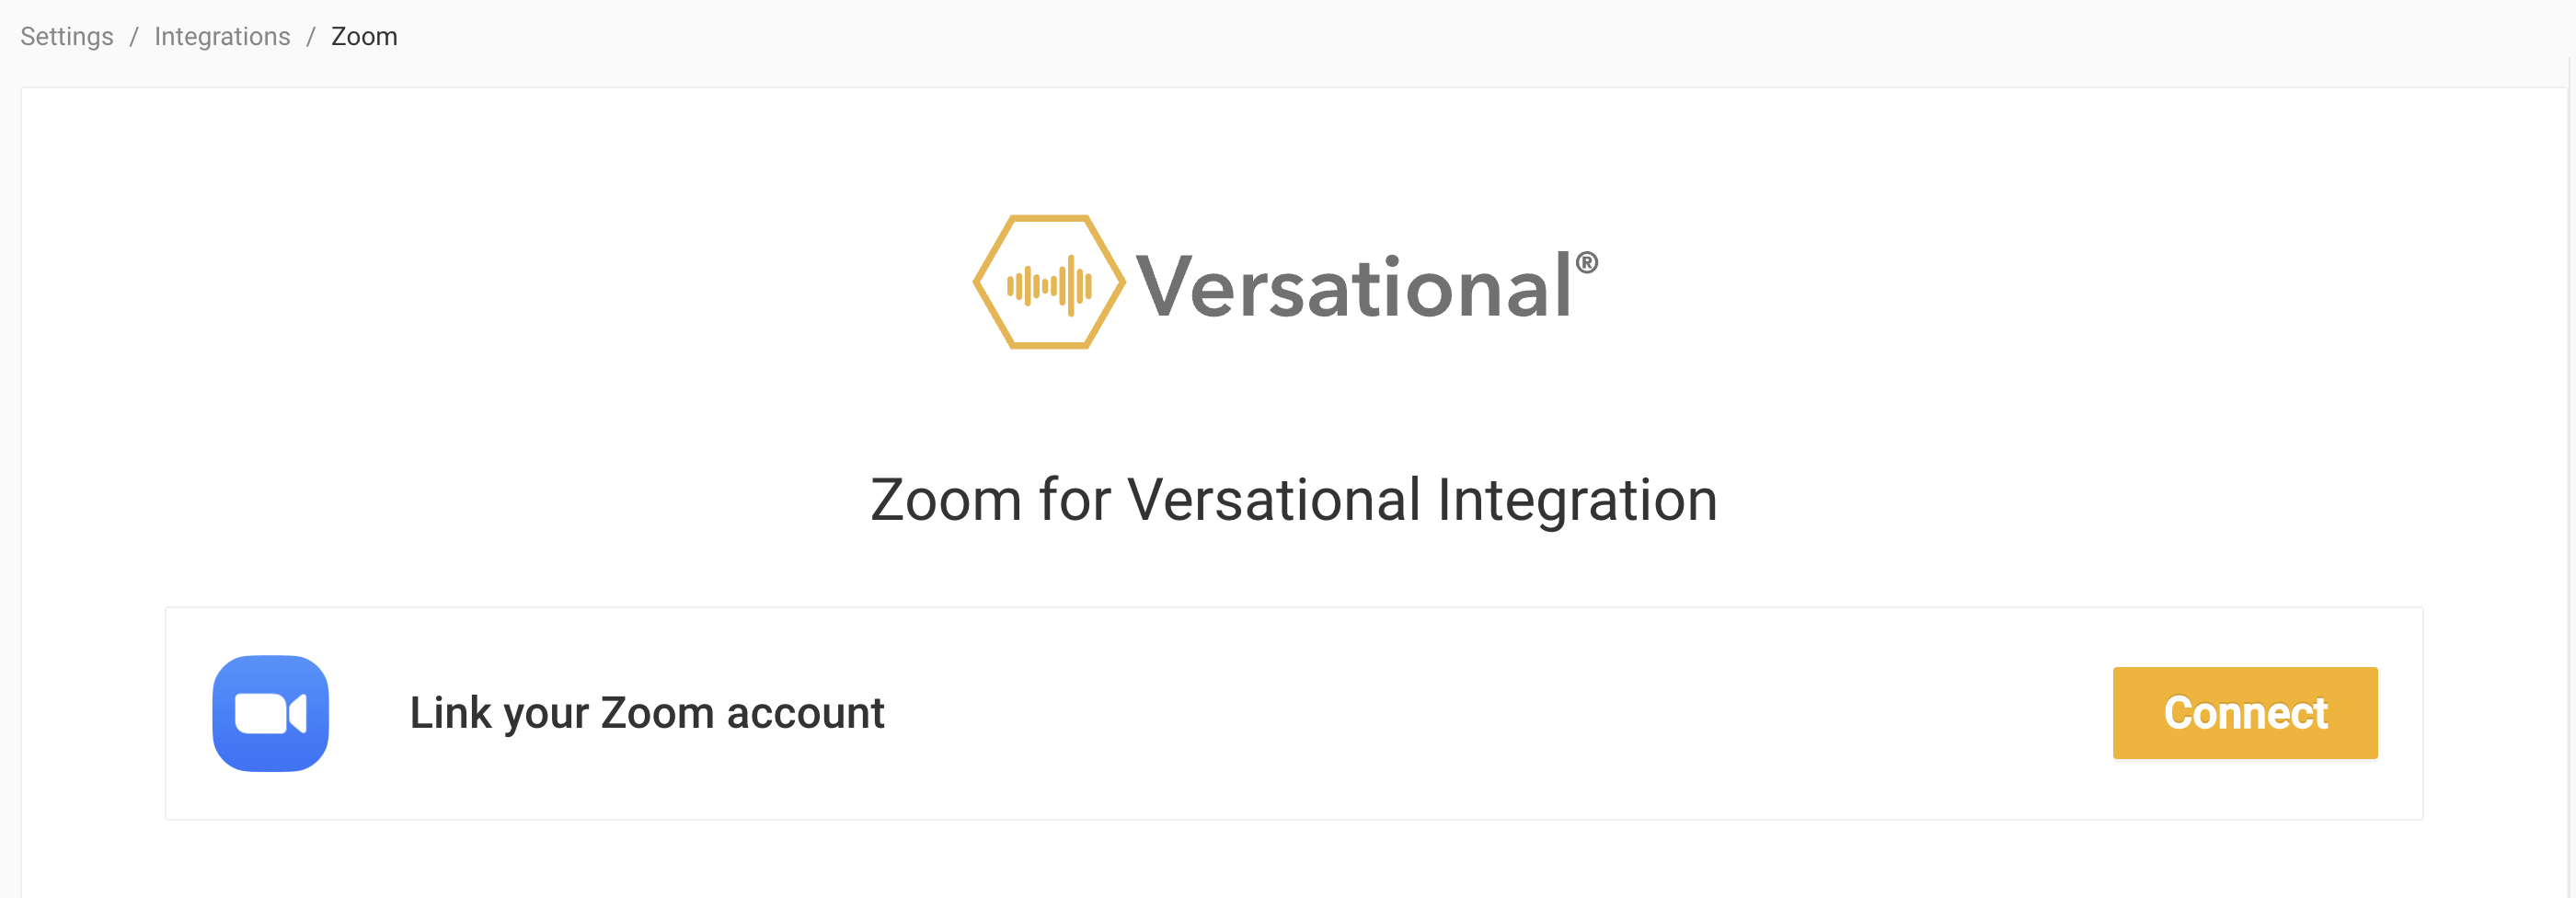 Zoom integration page